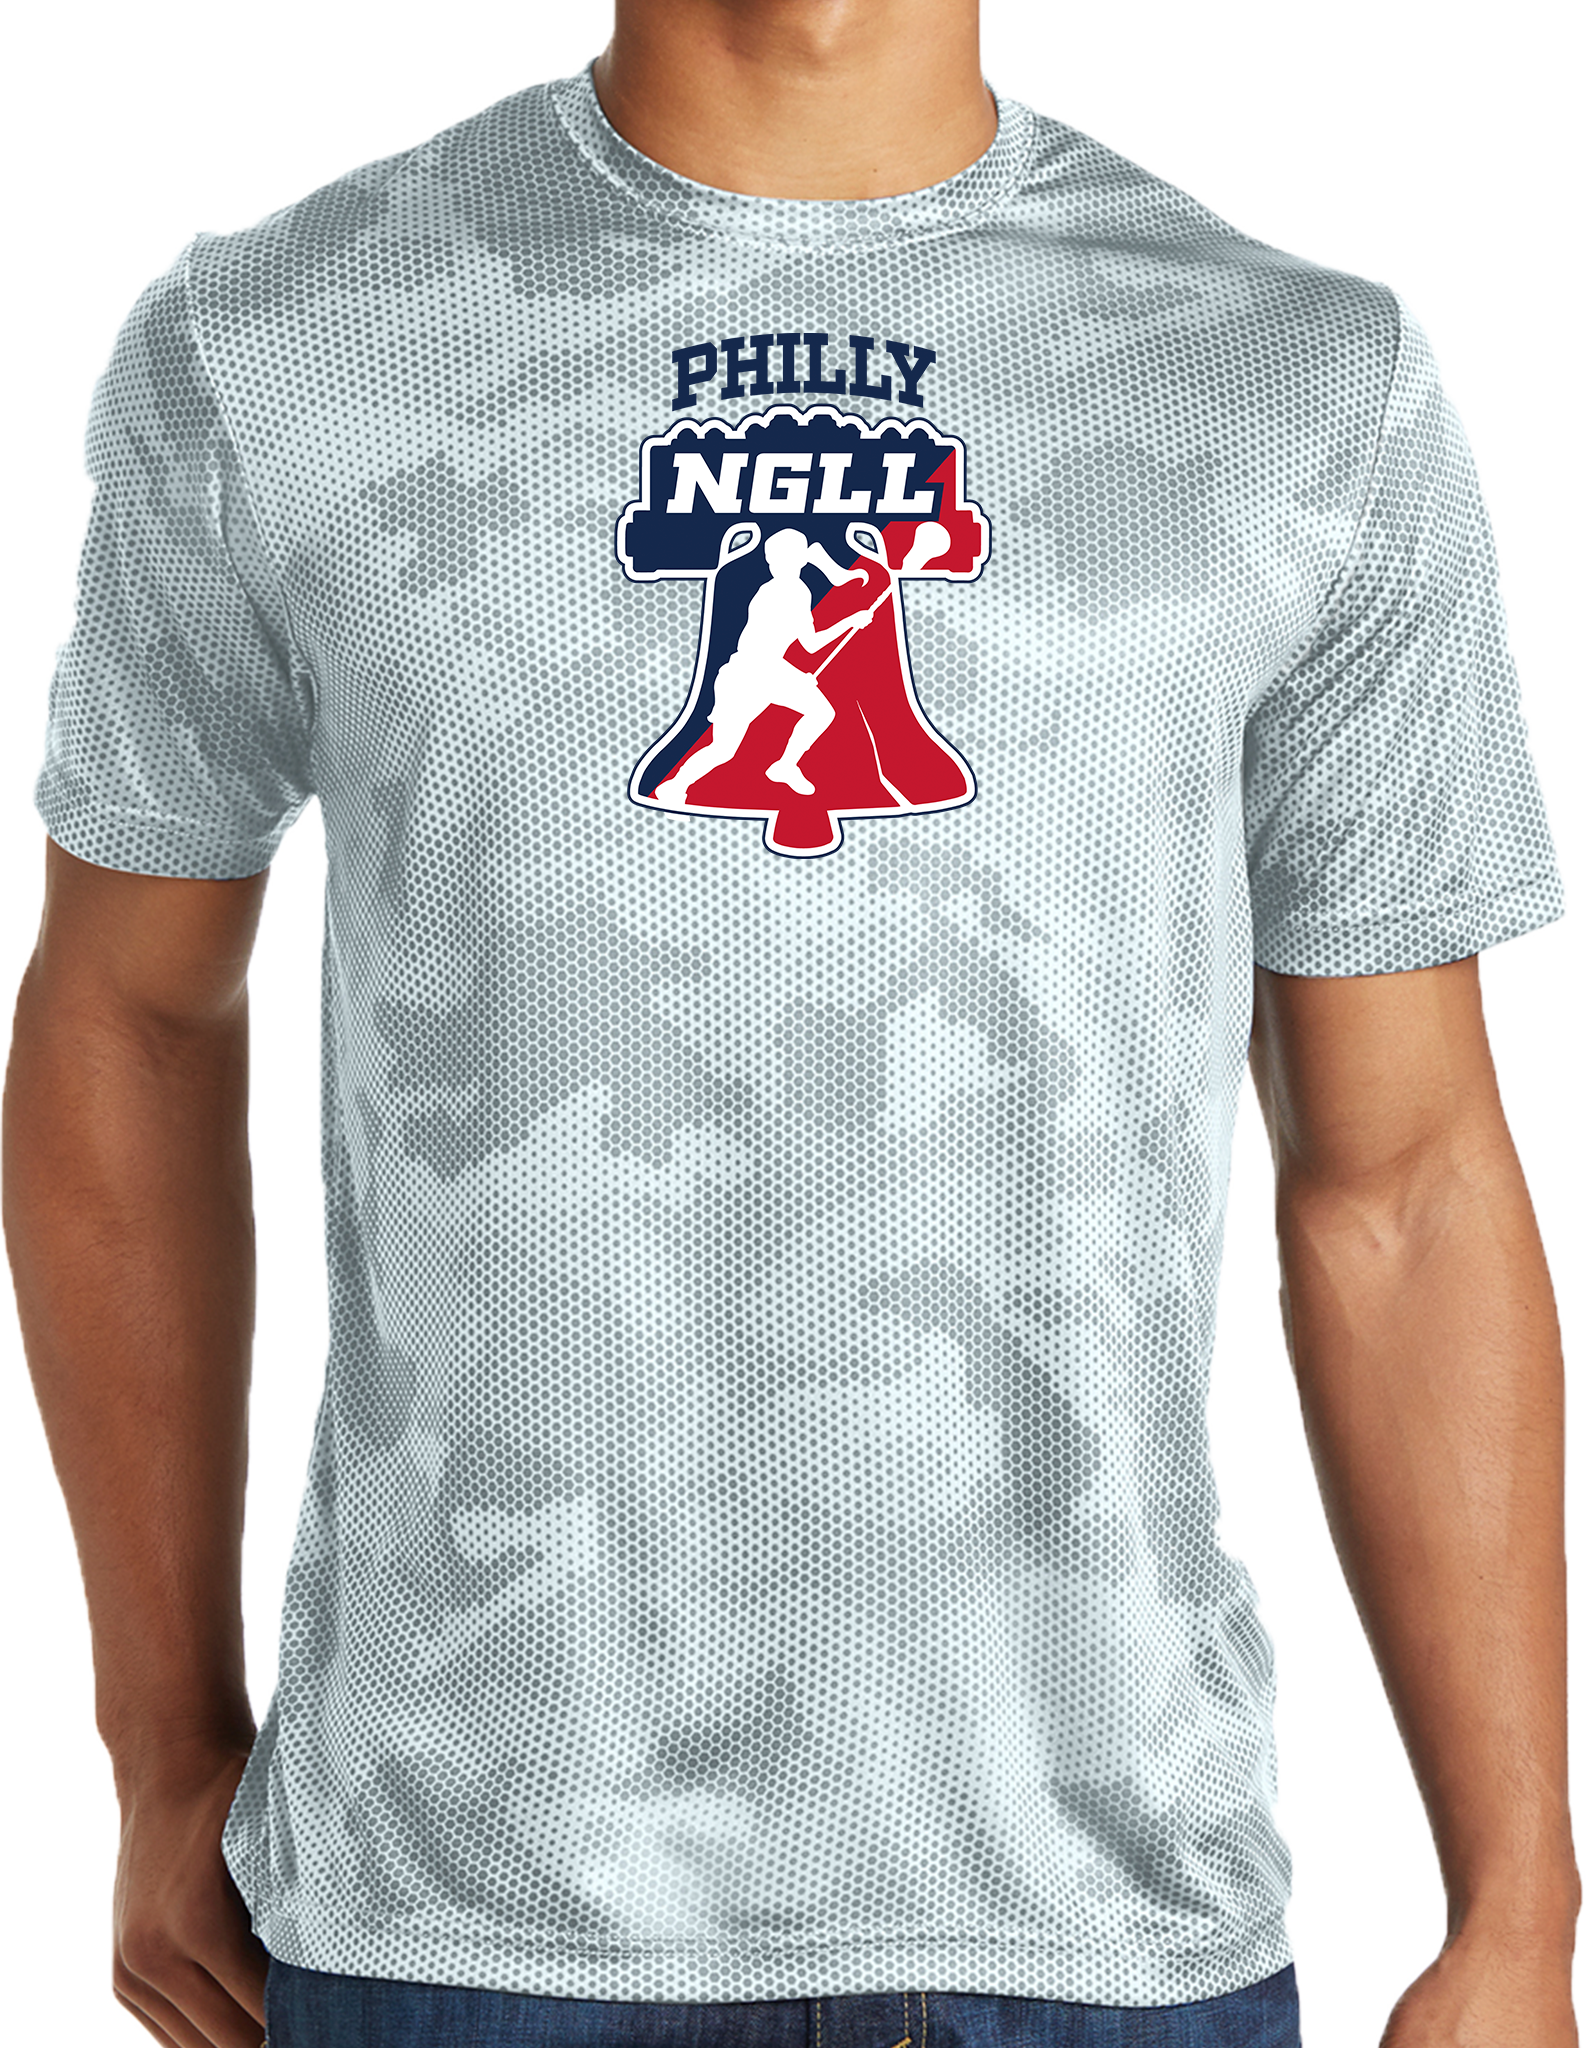 PERFORMANCE SHIRTS - 2023 NGLL Philly